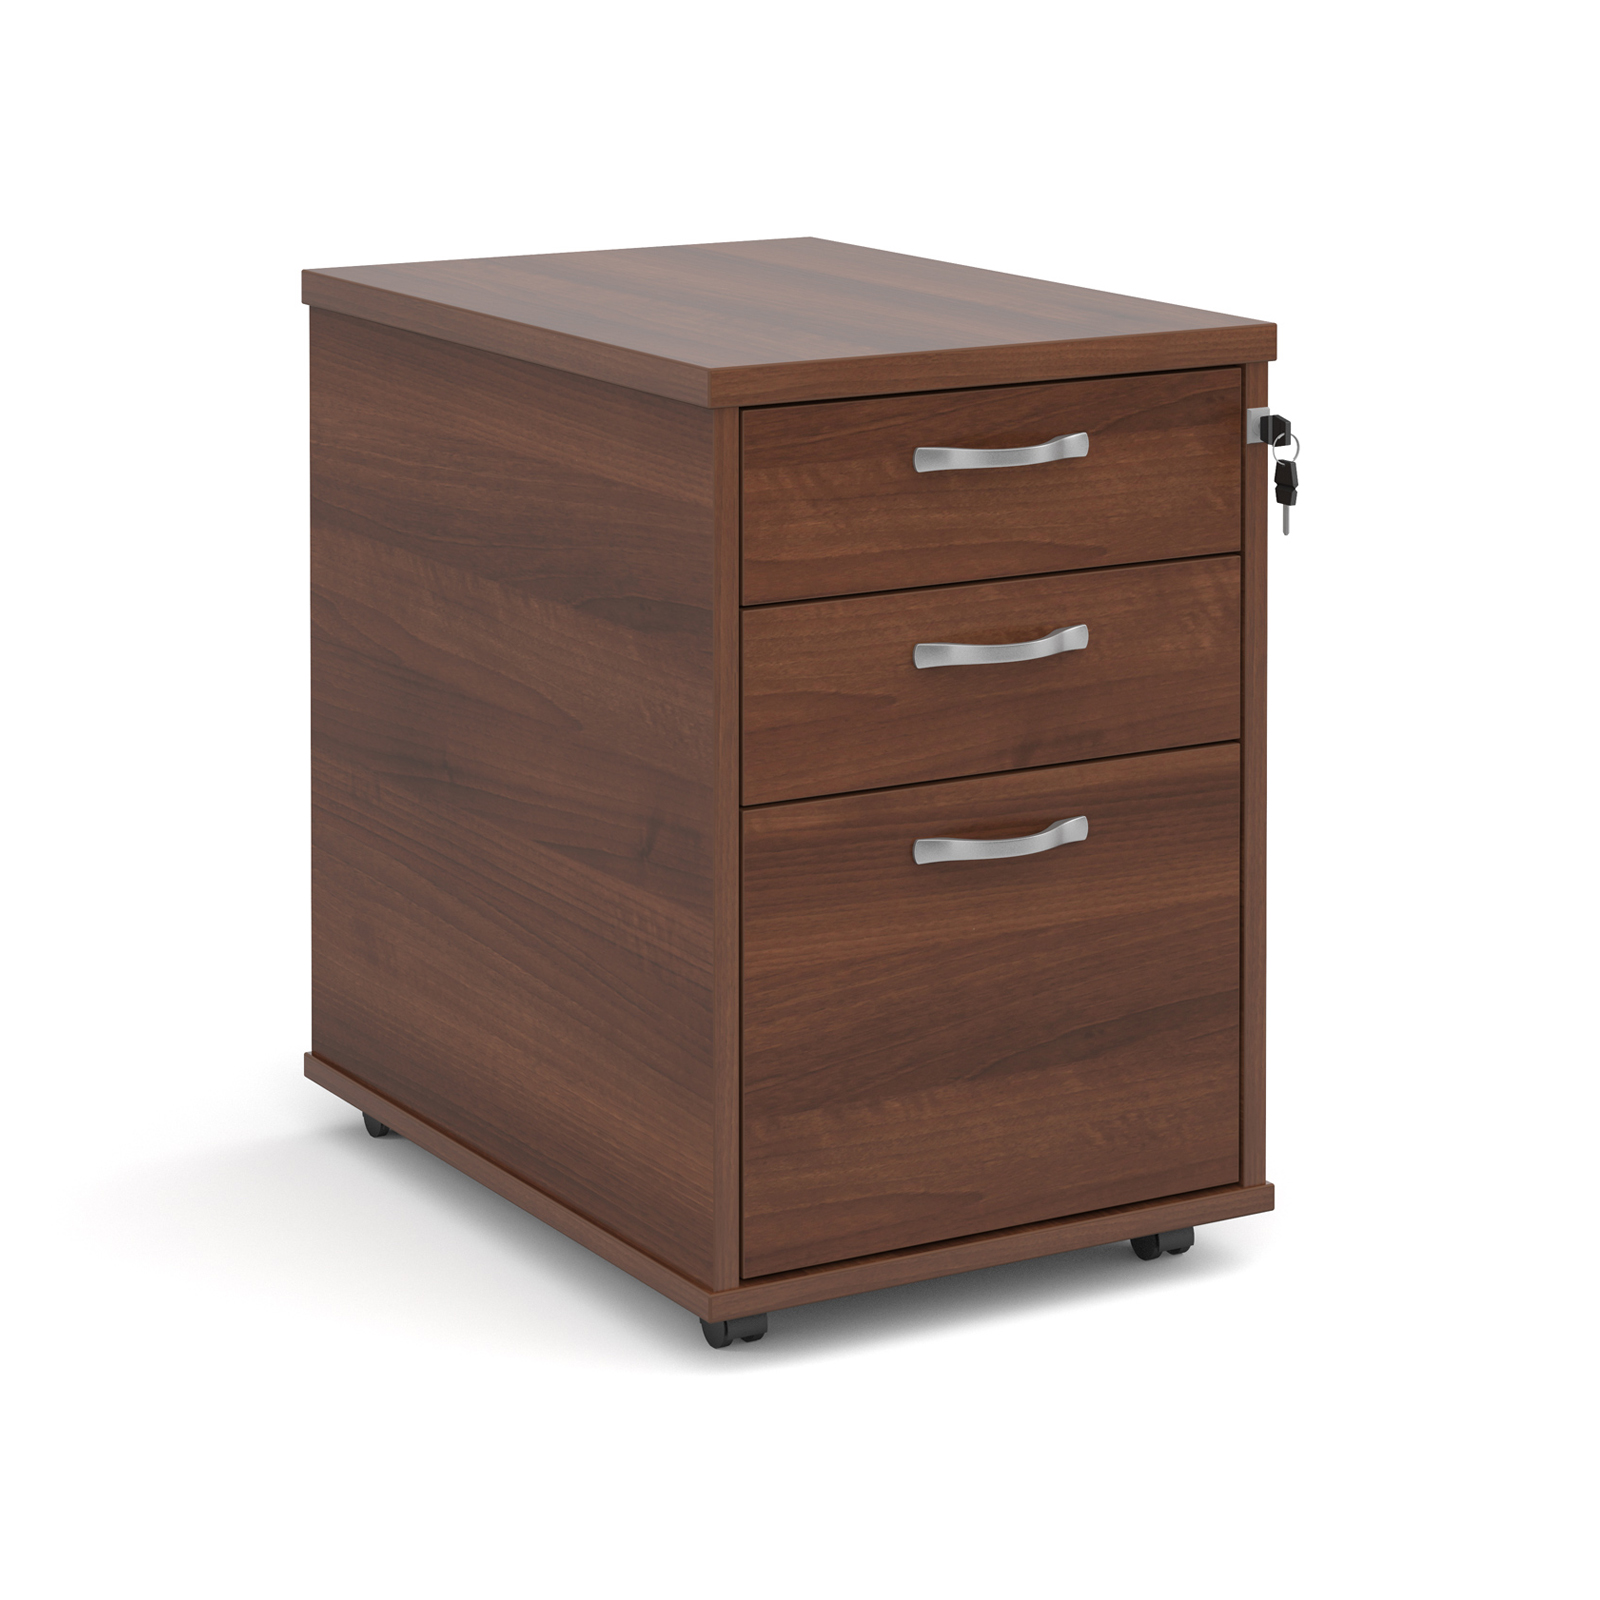 3 Drawer Tall mobile 3 drawer pedestal with silver handles 600mm deep - walnut